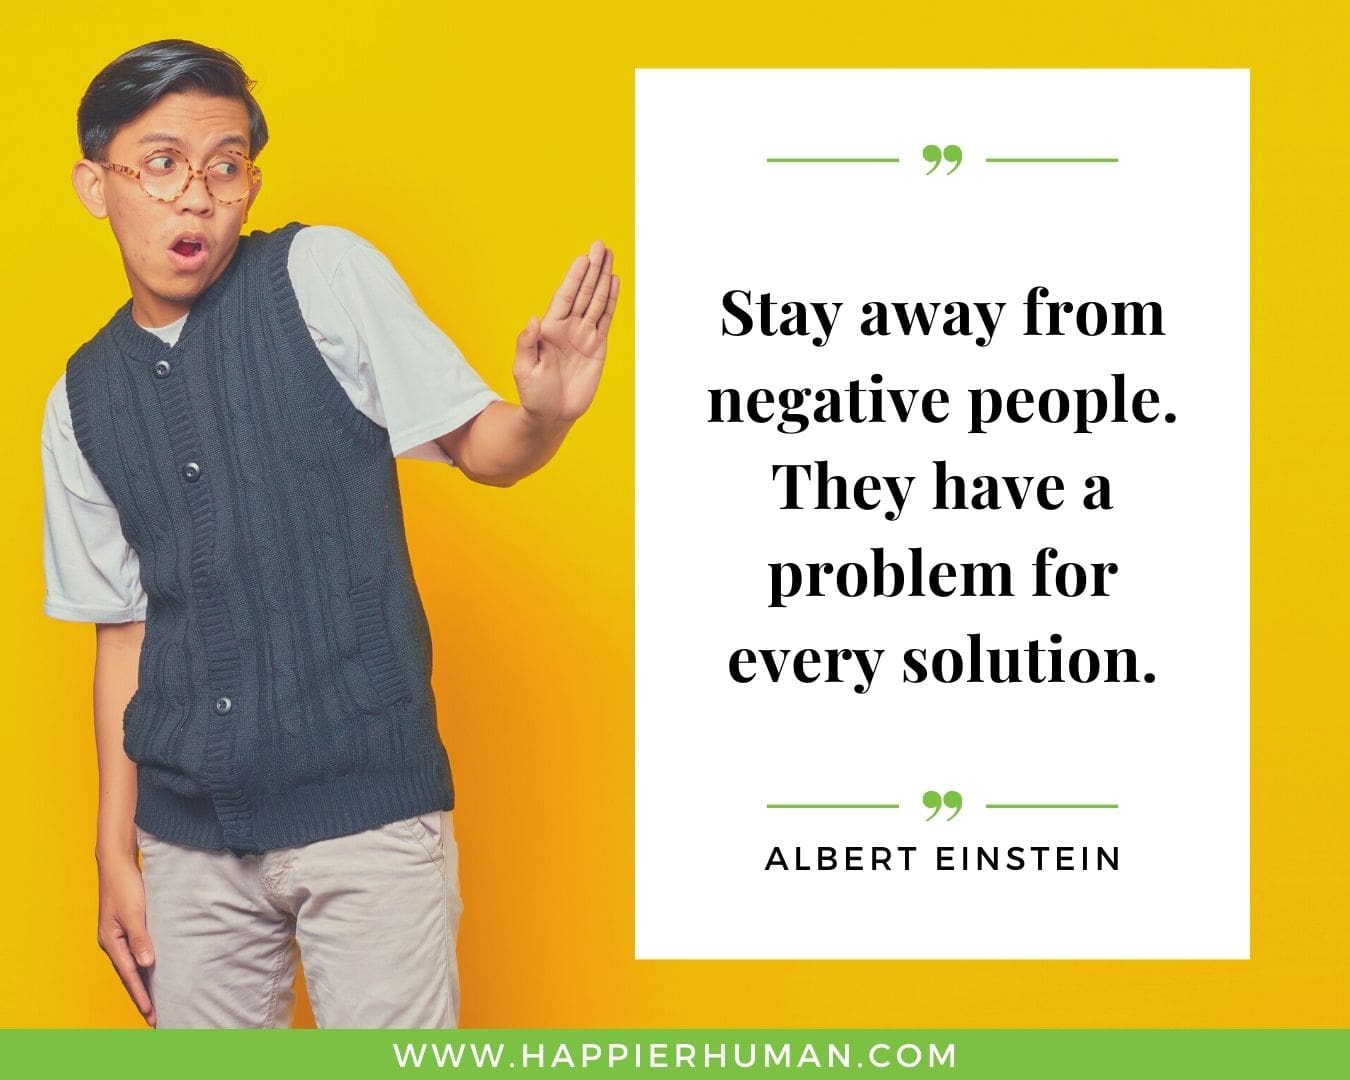 Haters Quotes - “Stay away from negative people. They have a problem for every solution.” - Albert Einstein